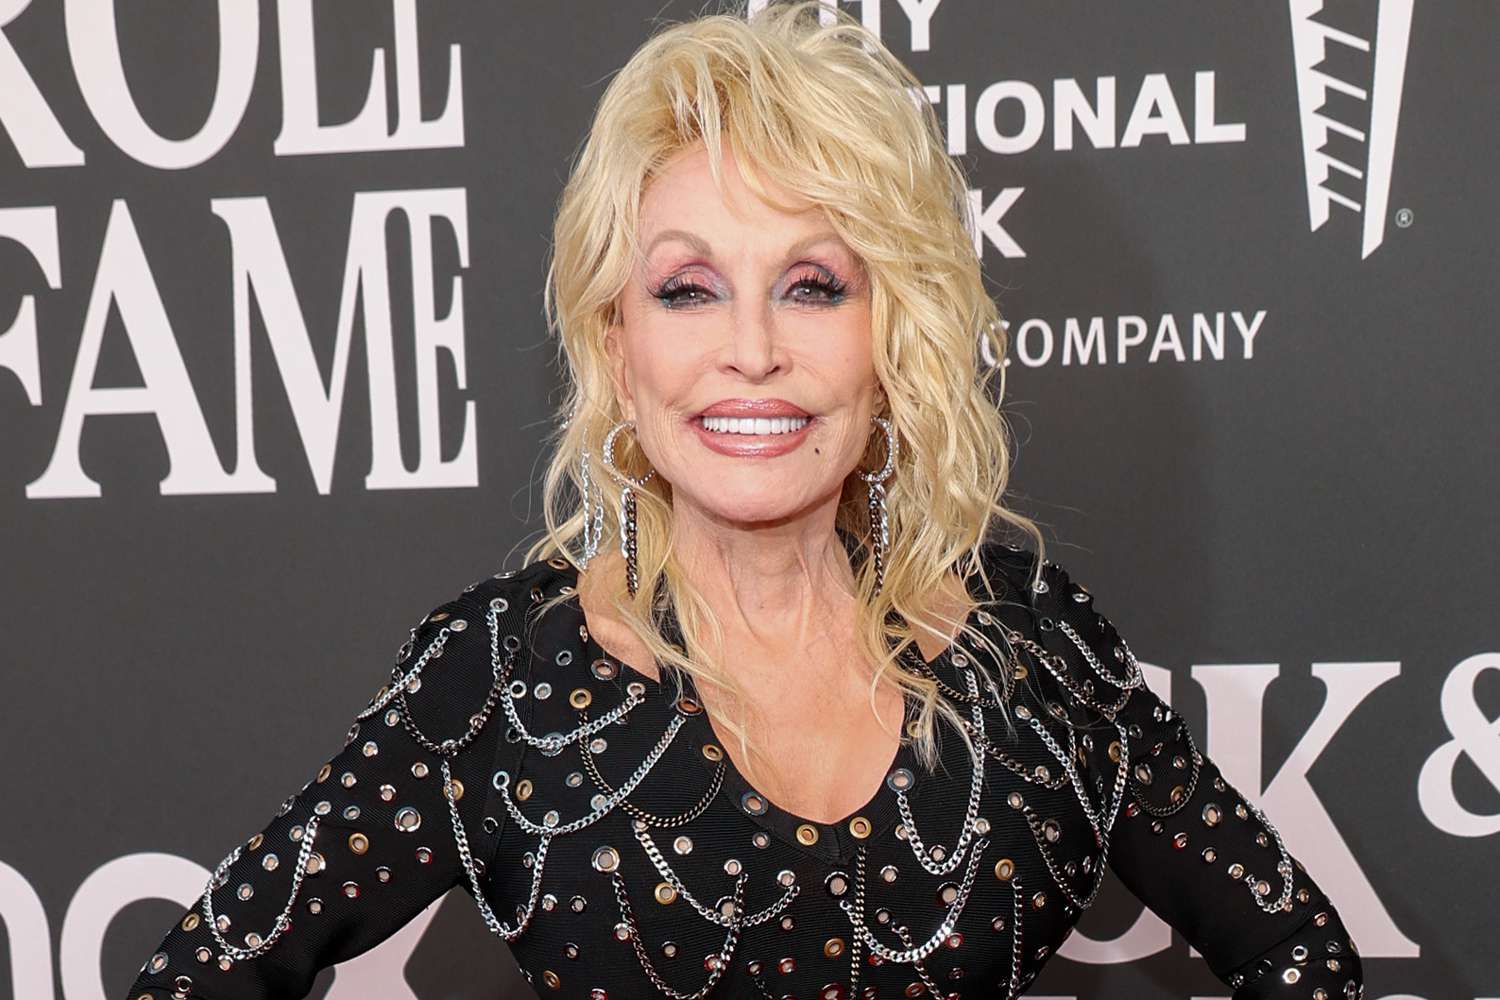 Dolly Parton Performs At Dallas Cowboys NFL Halftime Show, Leaves Crowd In Awe